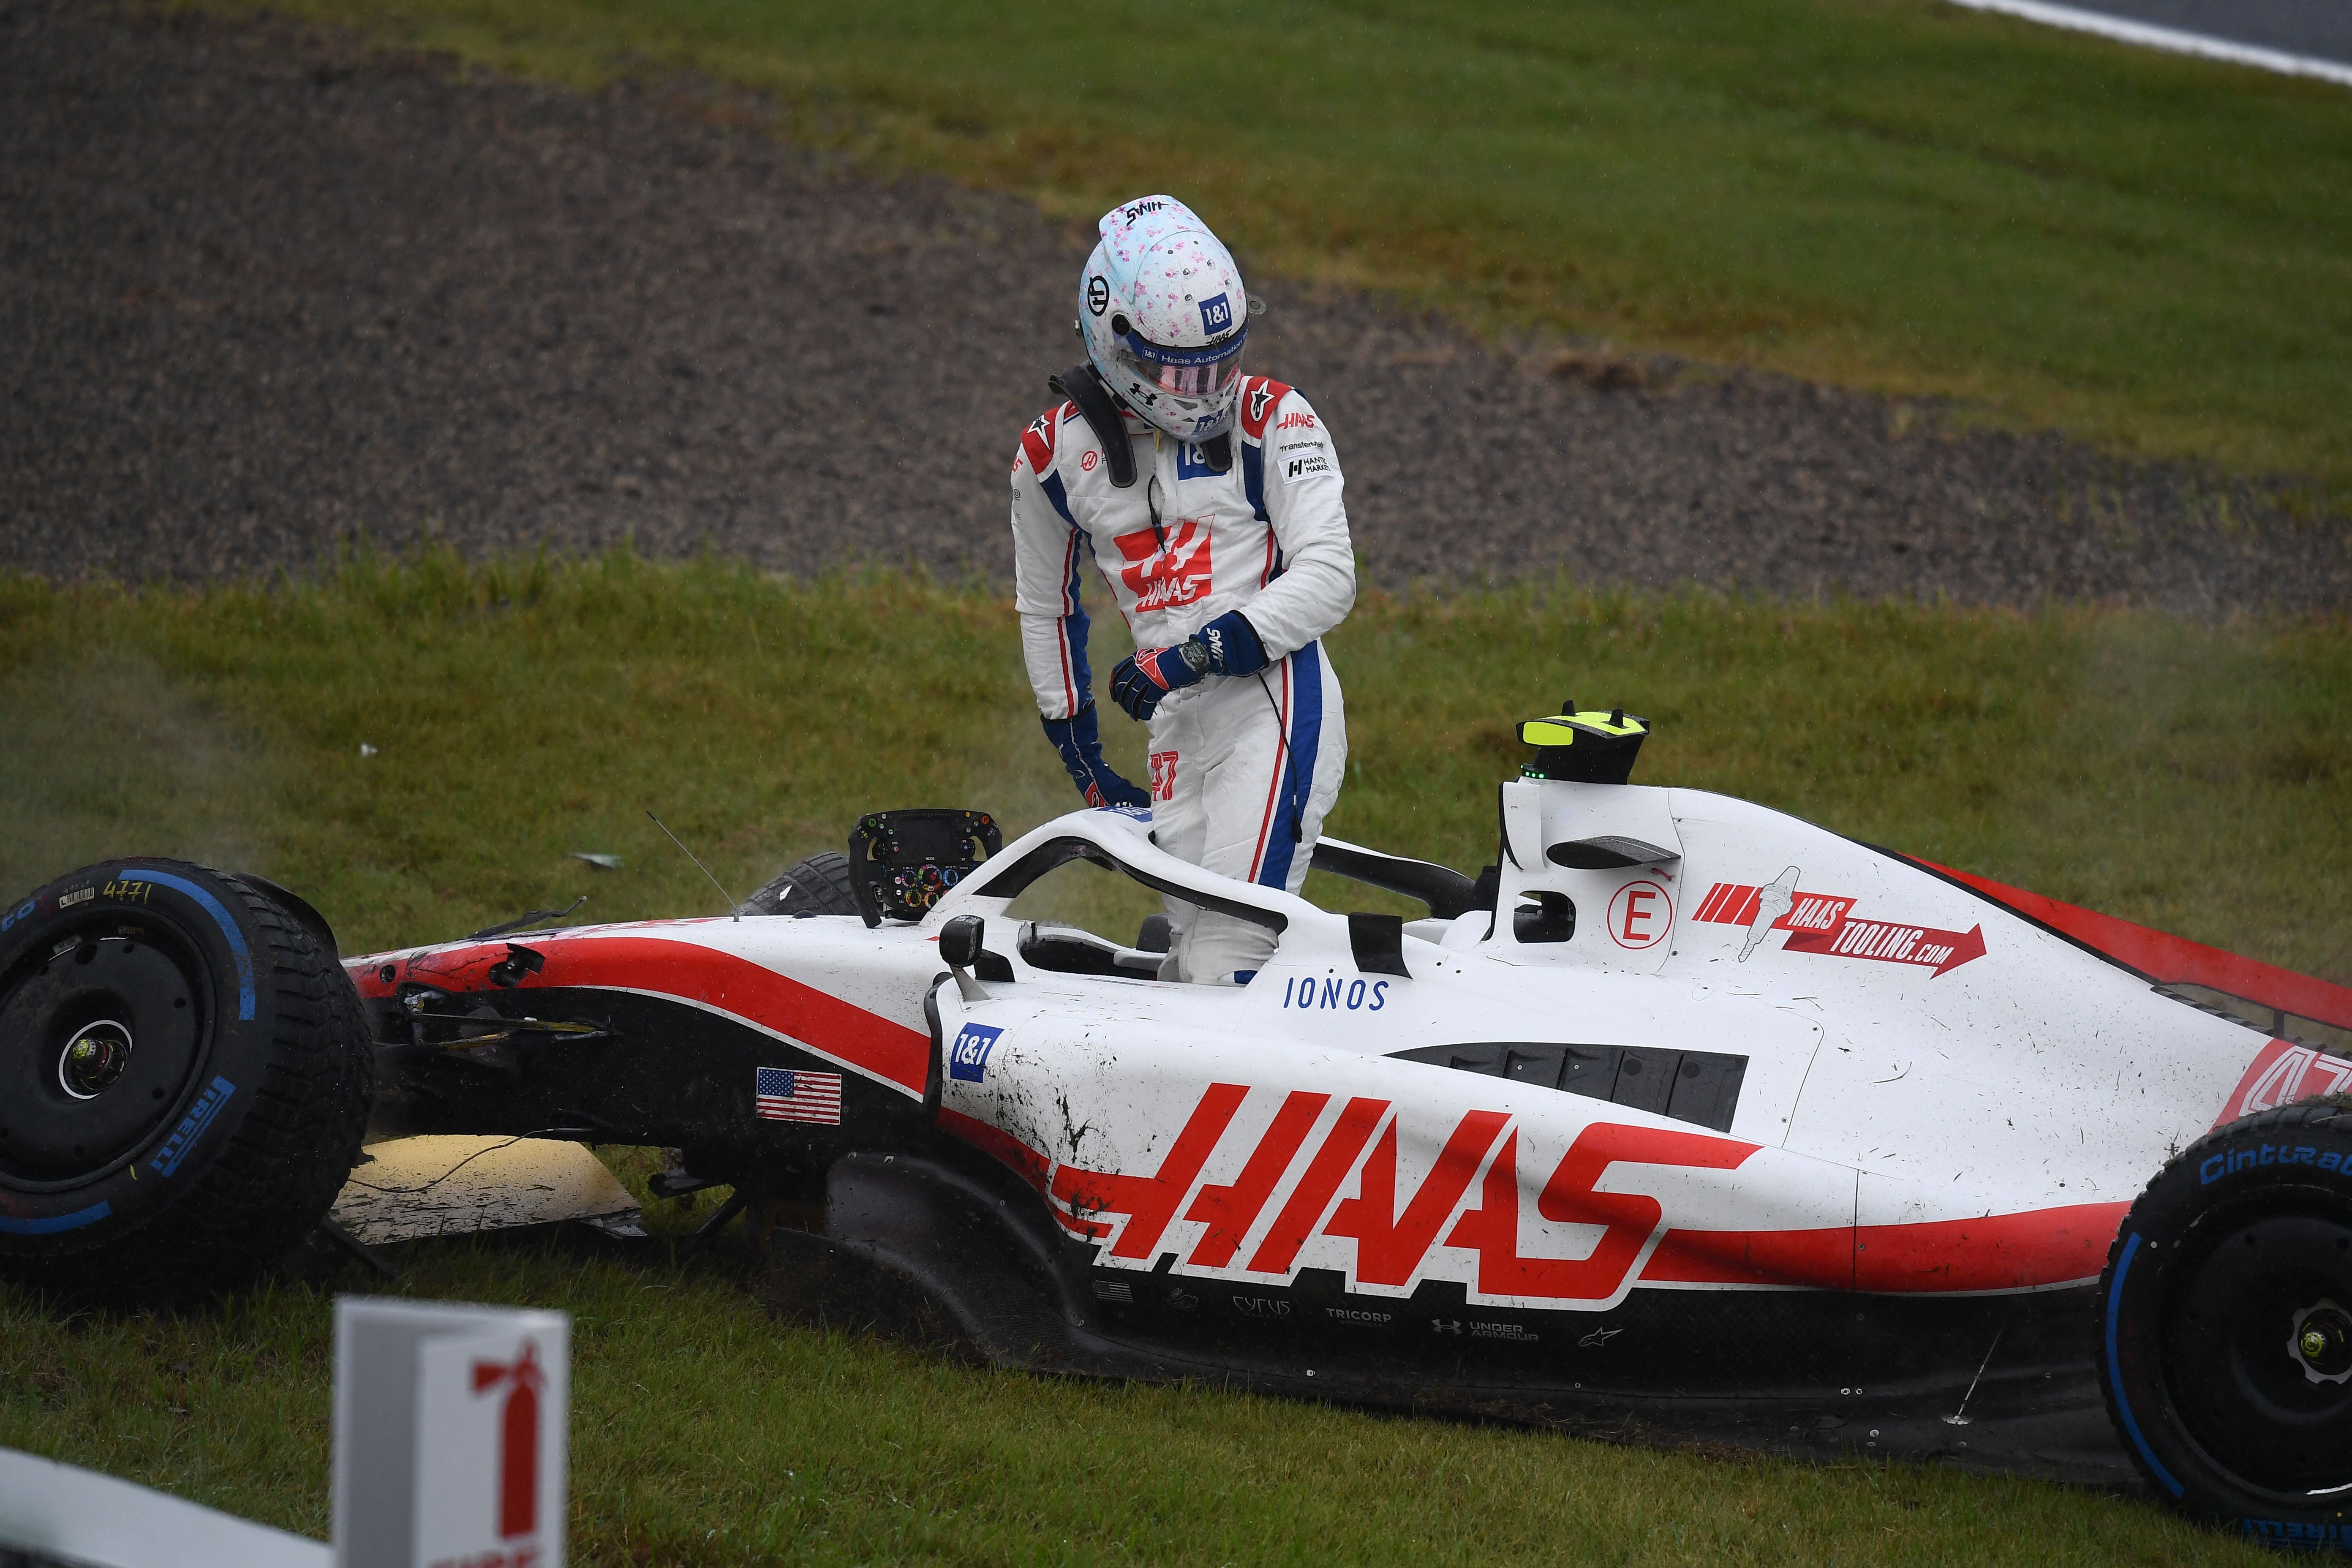 Mick Schumacher crashed on a ‘slow lap’ in Japan last year